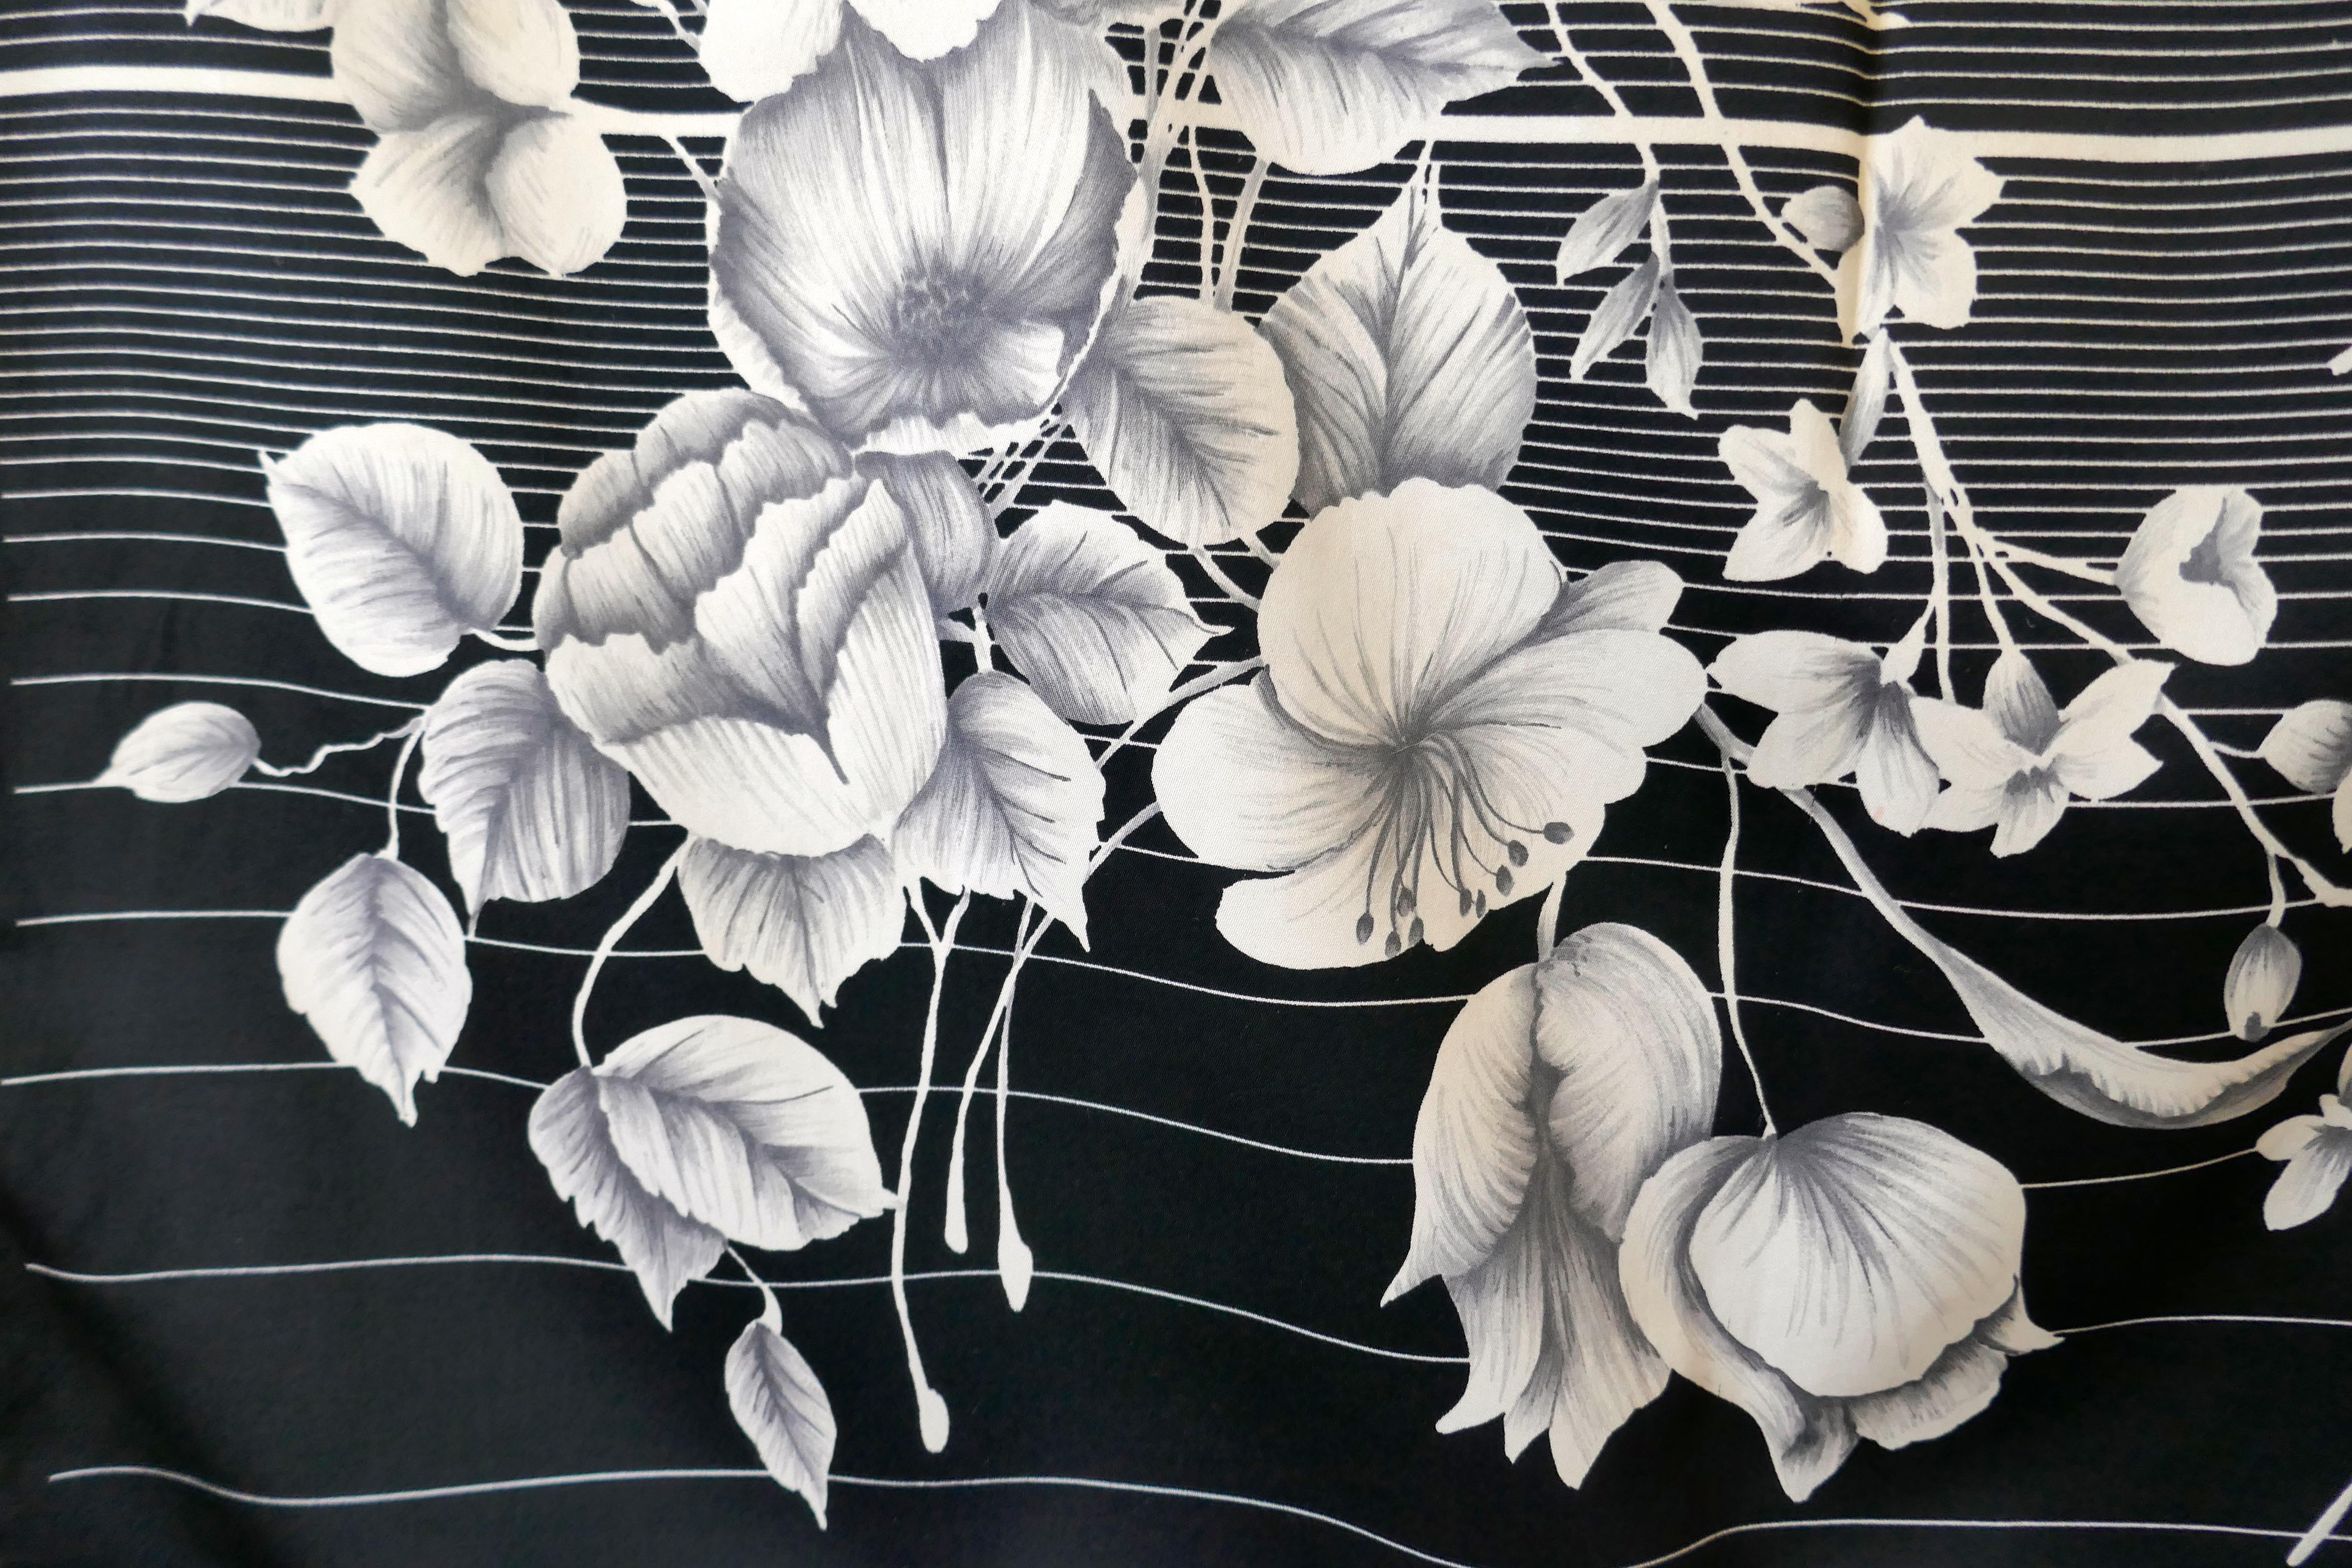 1970s Vintage Art Scarf, Chic Design in Black and White from Guy st. Honoré Exclusive

Charming and striking, white shaded flowers giving a 3D effect on a black background 

Made in Polyester, the Scarf measures 30”x 30”, rolled hem
in Very good 